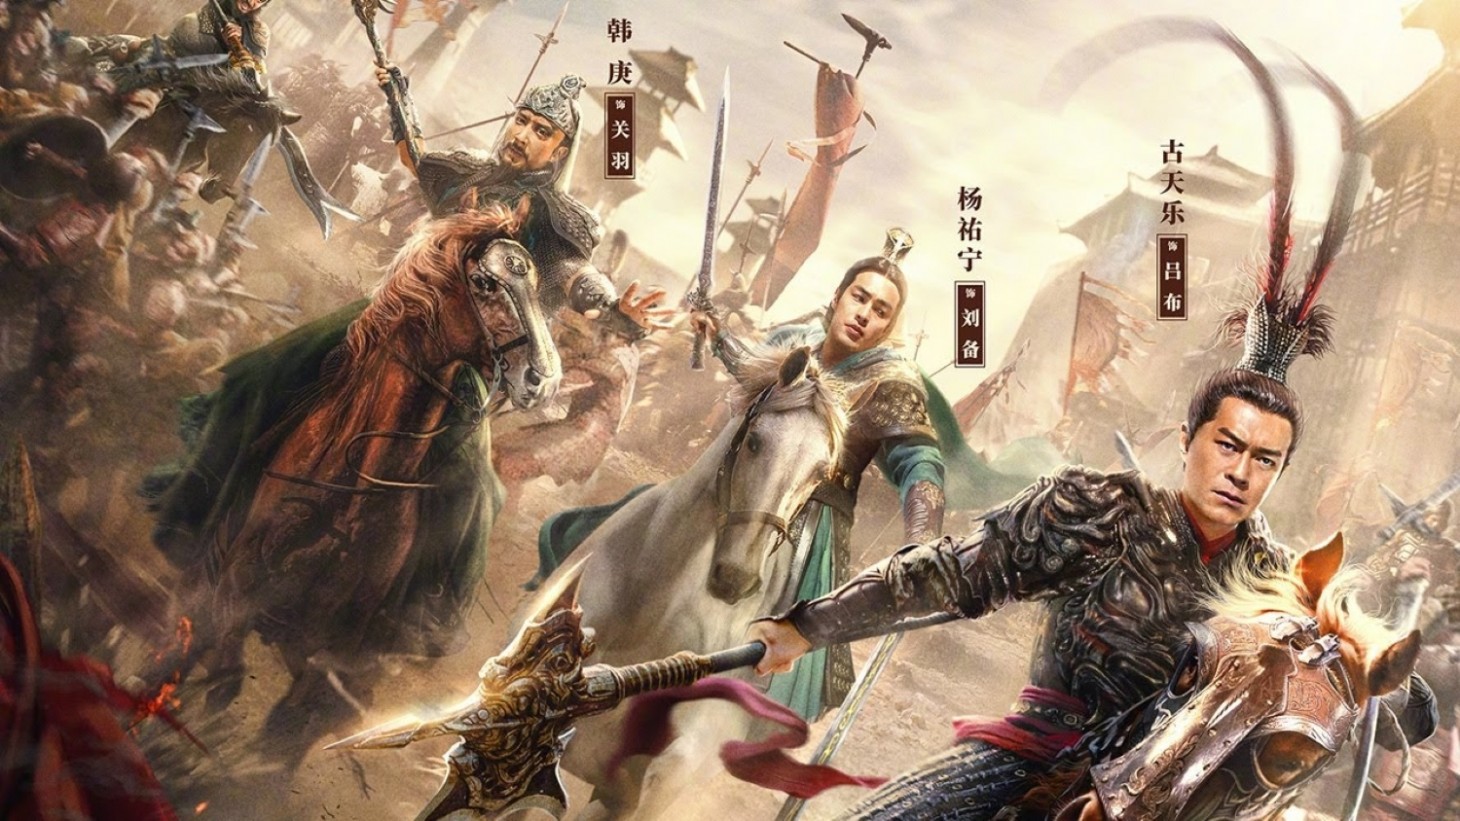 Live-Action Dynasty Warriors Movie Trailer Revealed - Game ...